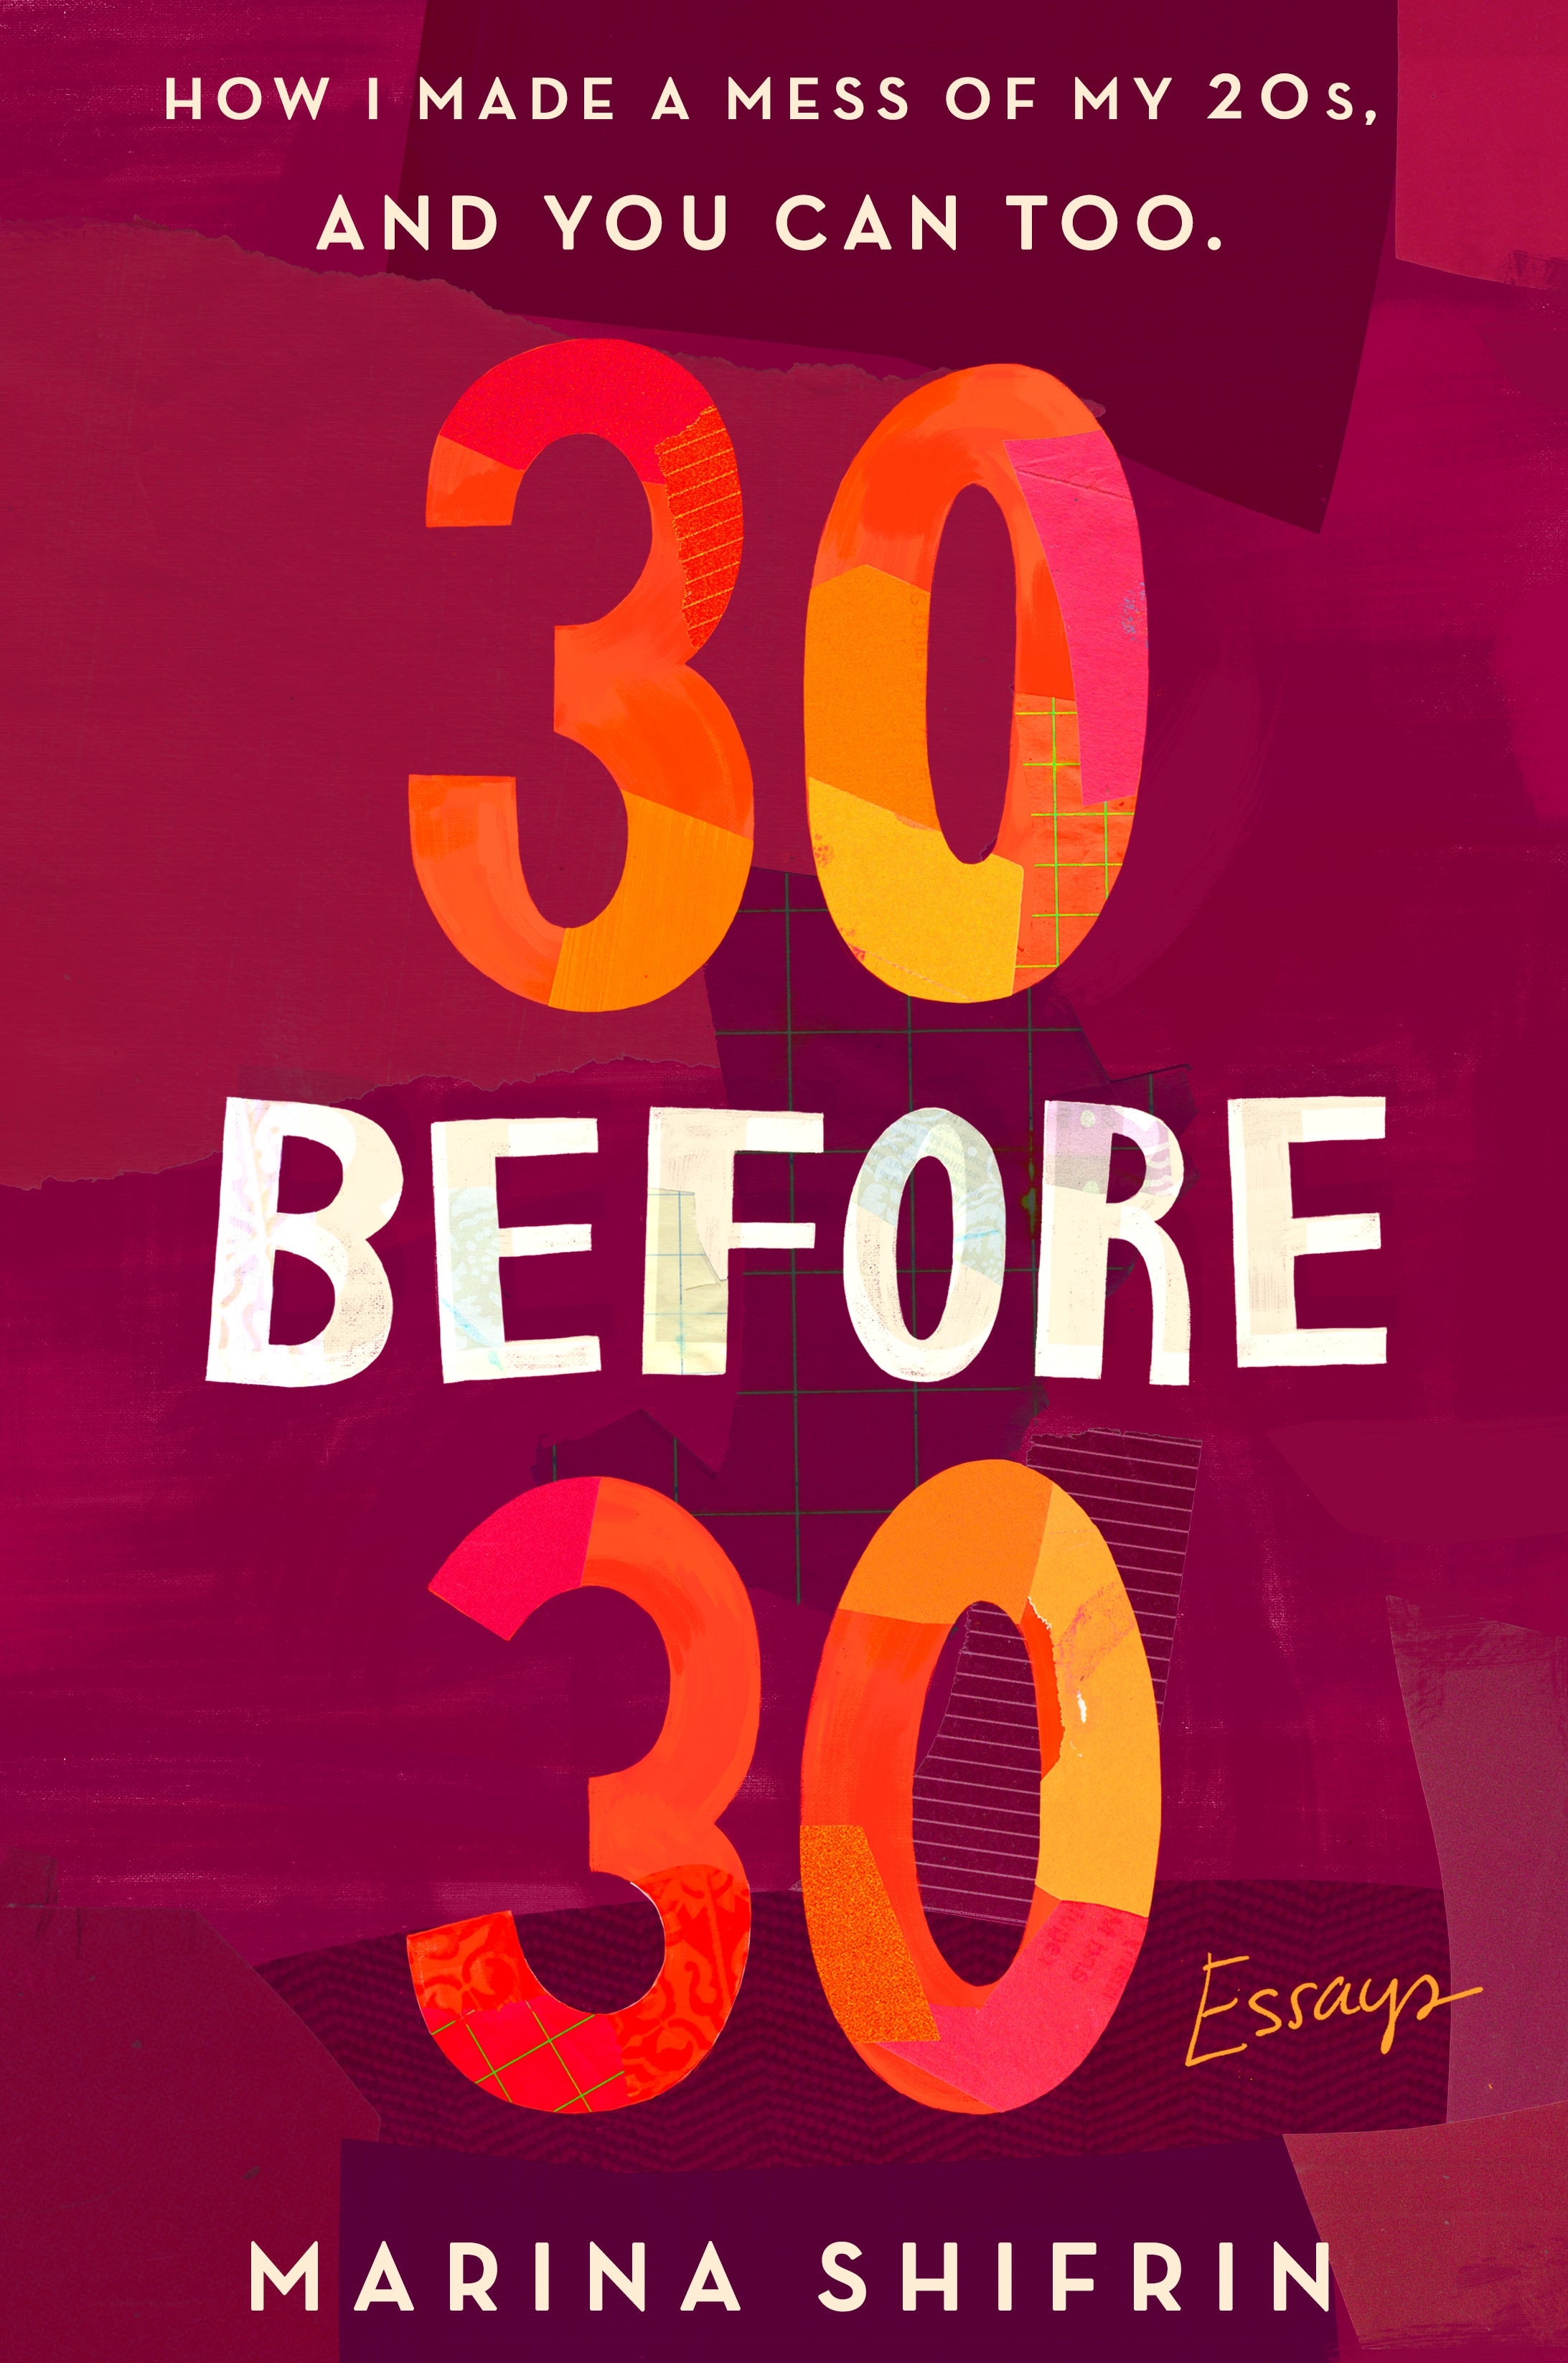 Book Launch: 30 Before 30: How I Made a Mess of My 20s, and You Can Too by Marina Shifrin